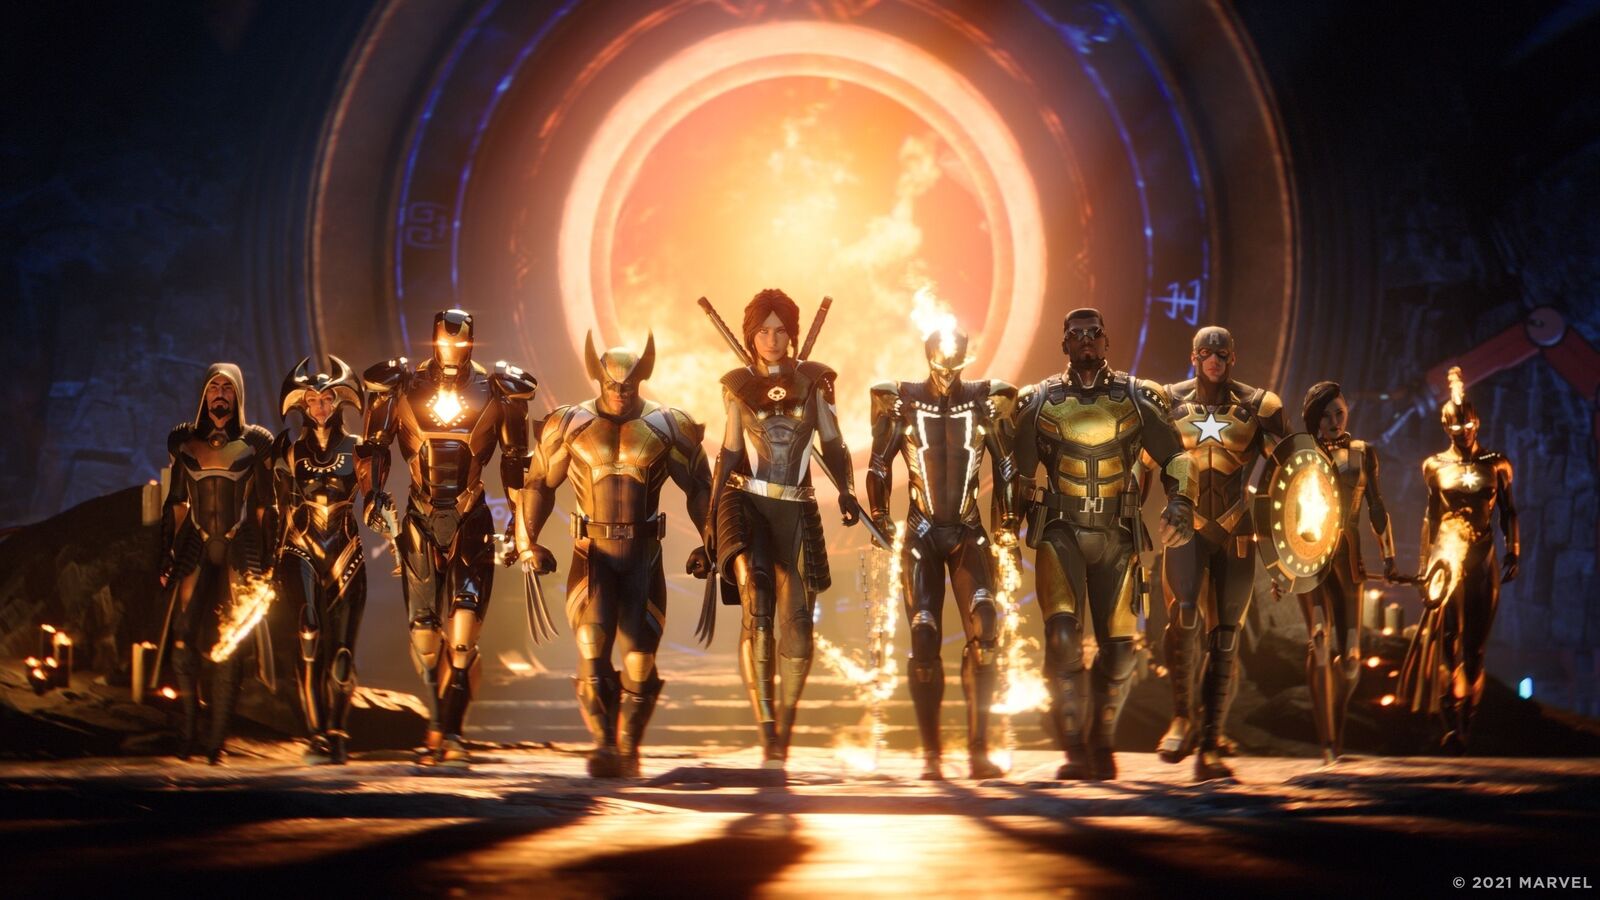 Marvel's Midnight Suns cast, All voice actors & characters confirmed